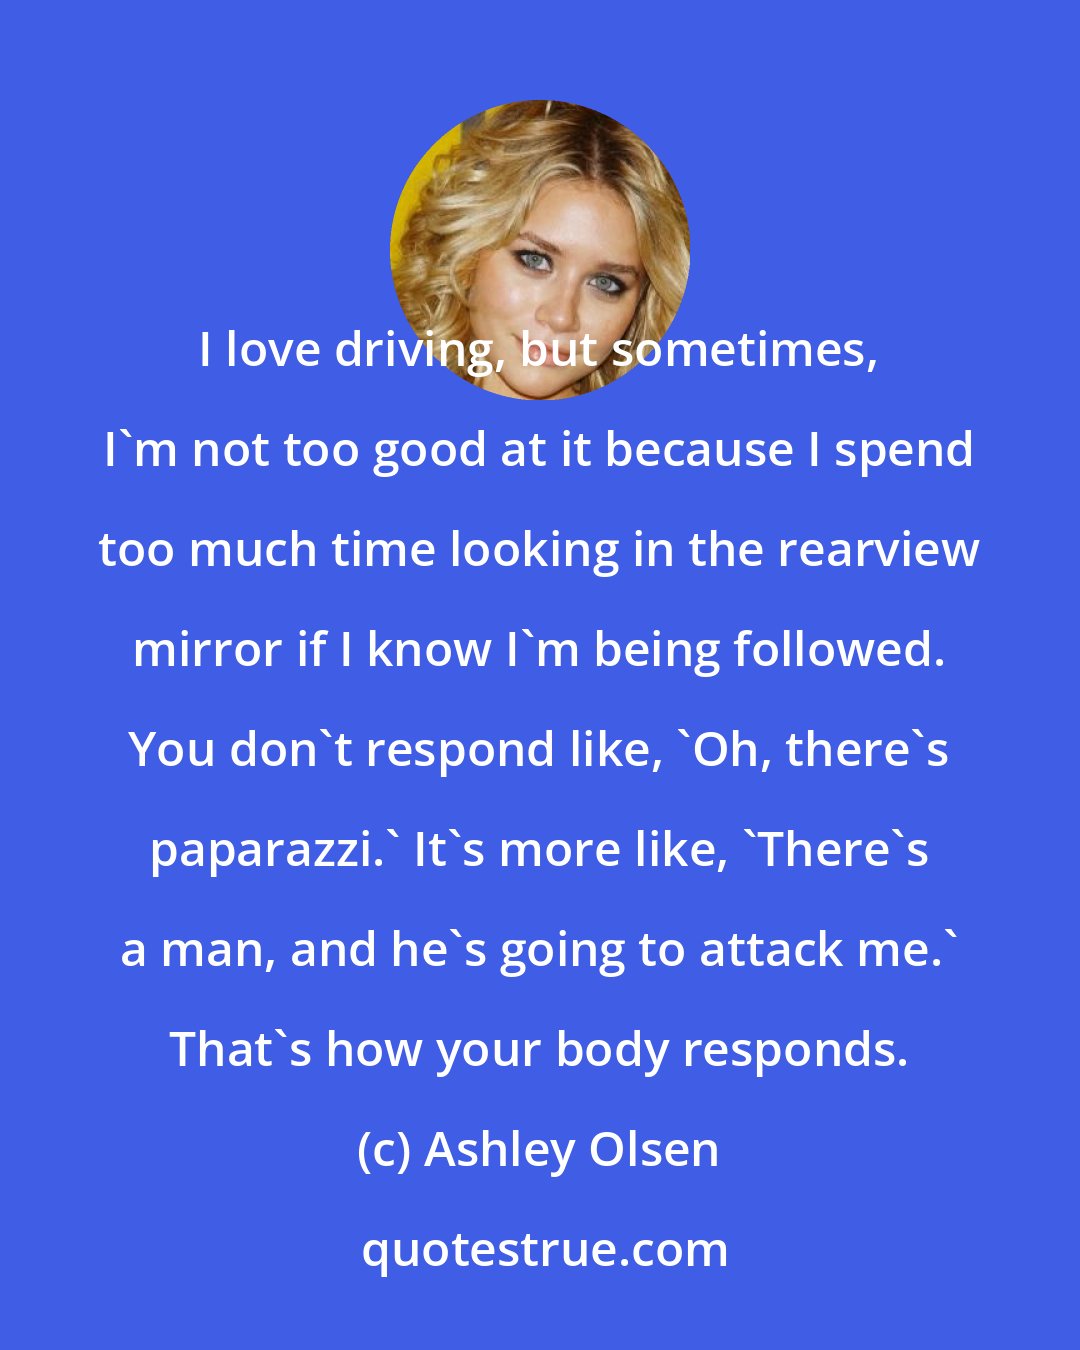 Ashley Olsen: I love driving, but sometimes, I'm not too good at it because I spend too much time looking in the rearview mirror if I know I'm being followed. You don't respond like, 'Oh, there's paparazzi.' It's more like, 'There's a man, and he's going to attack me.' That's how your body responds.